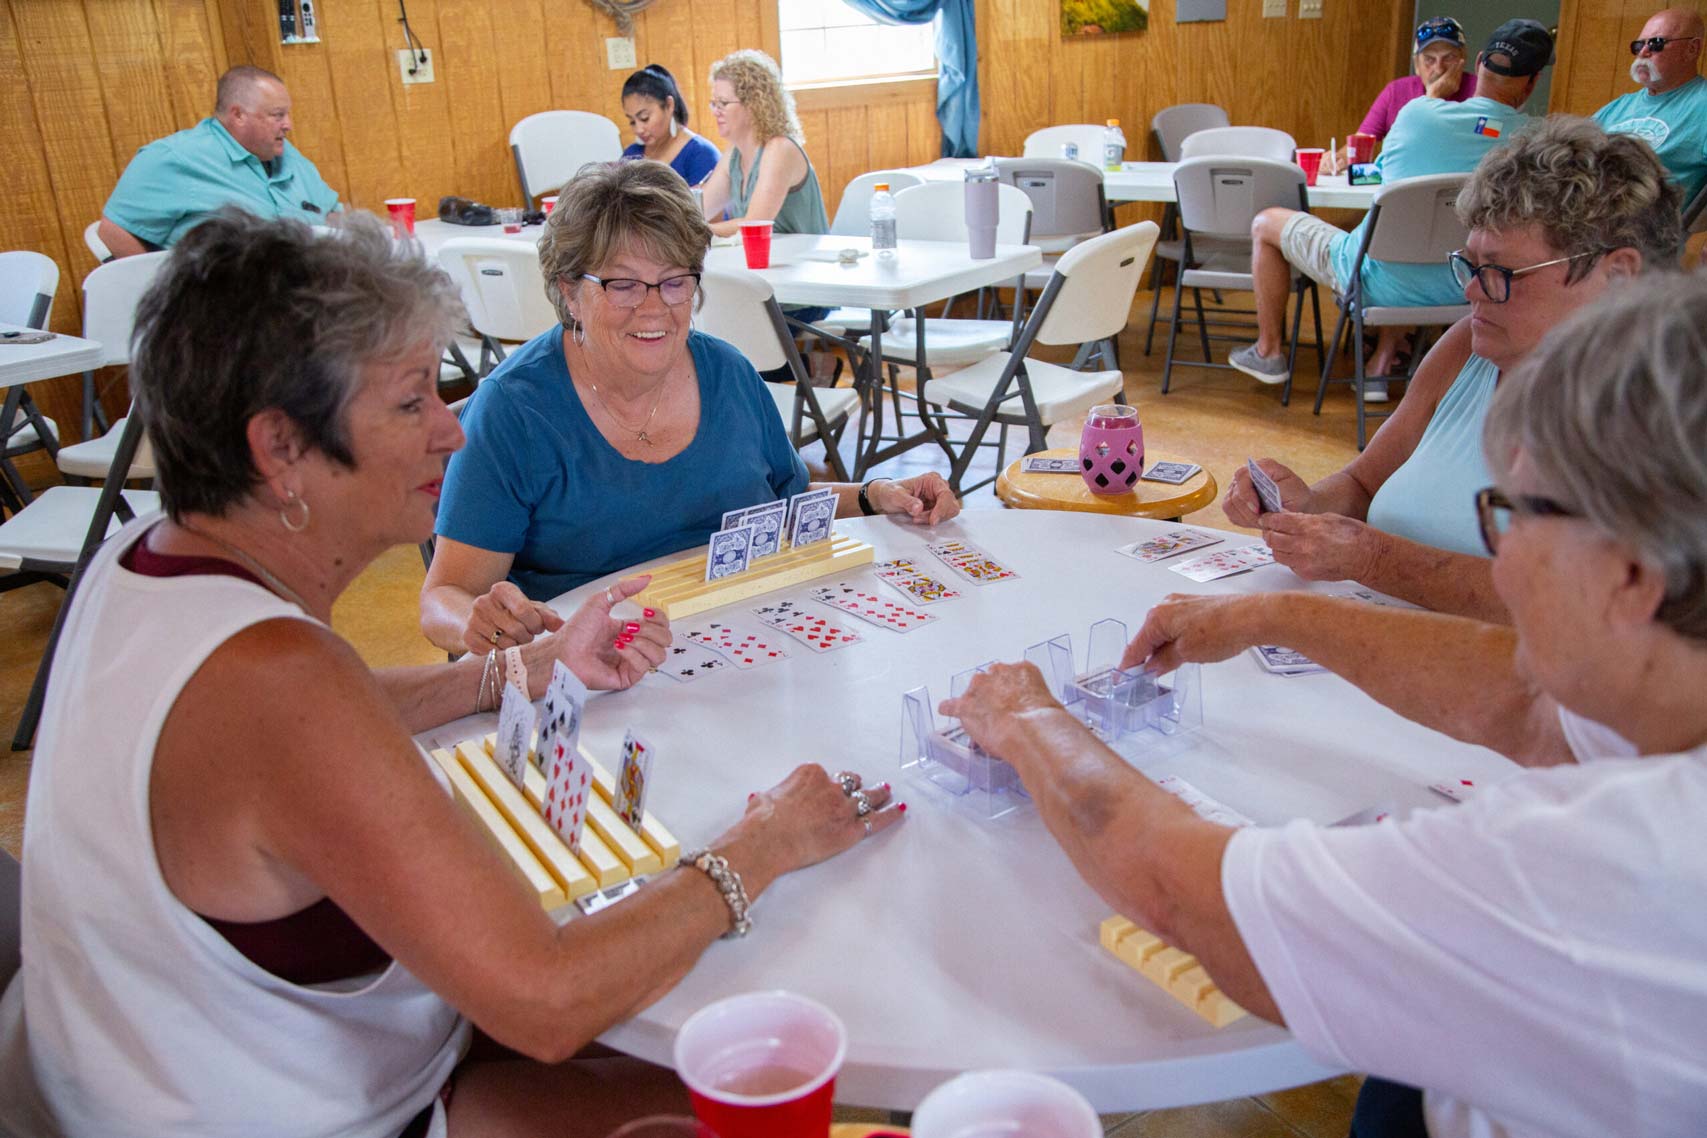 Group of friends playing cards and enjoying their time at a community hall in a long-term RV park near San Antonio, TX